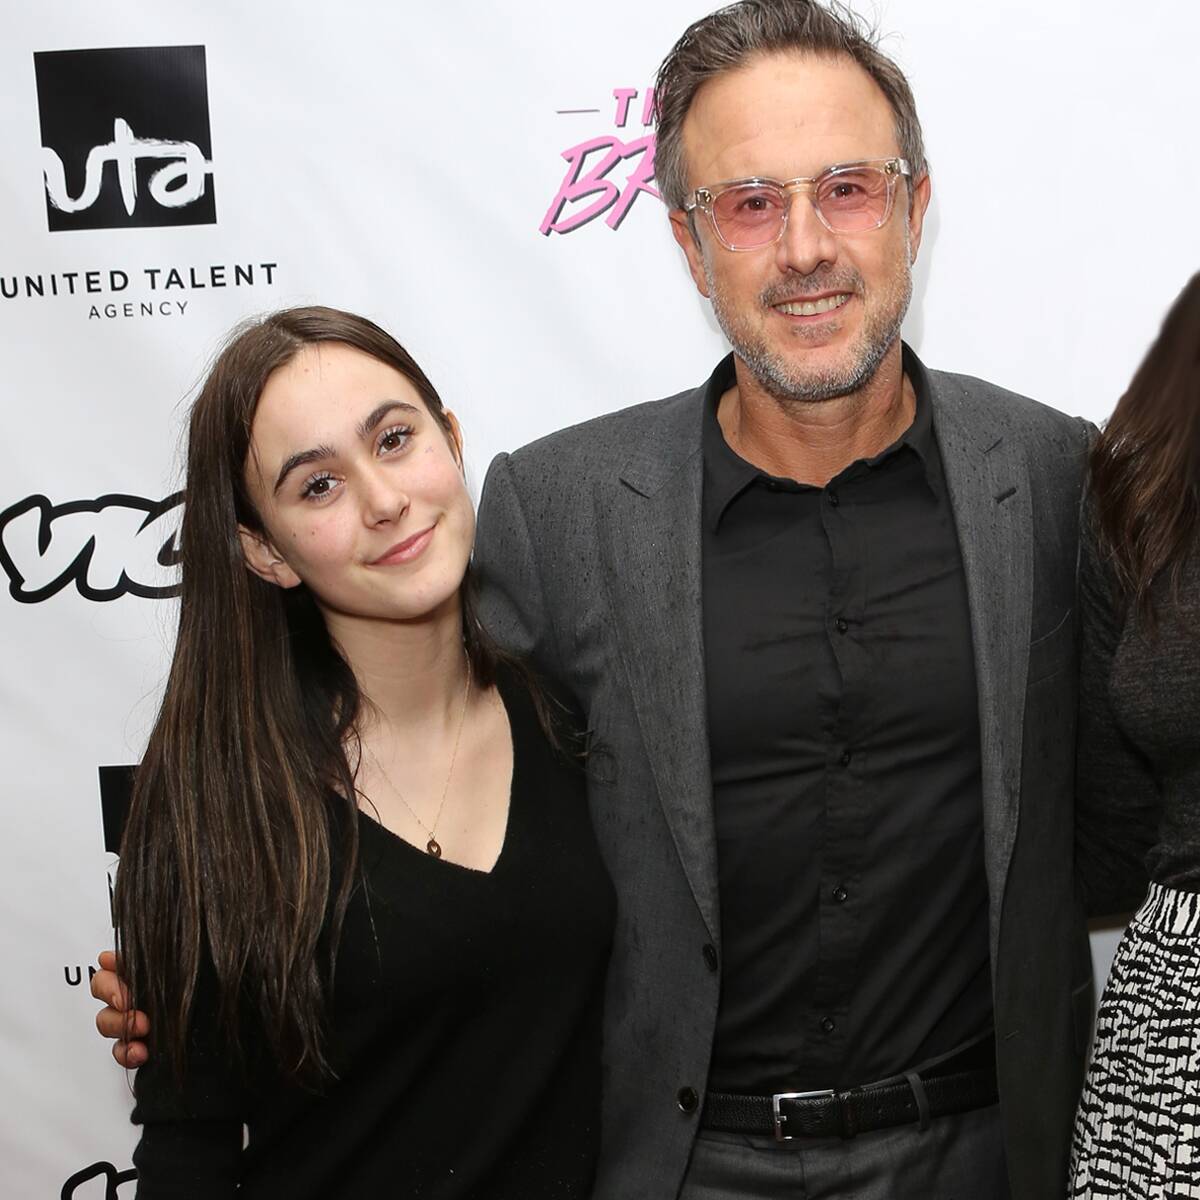 Why David Arquette Feels He Owes an Apology to His and Courteney Cox's Daughter